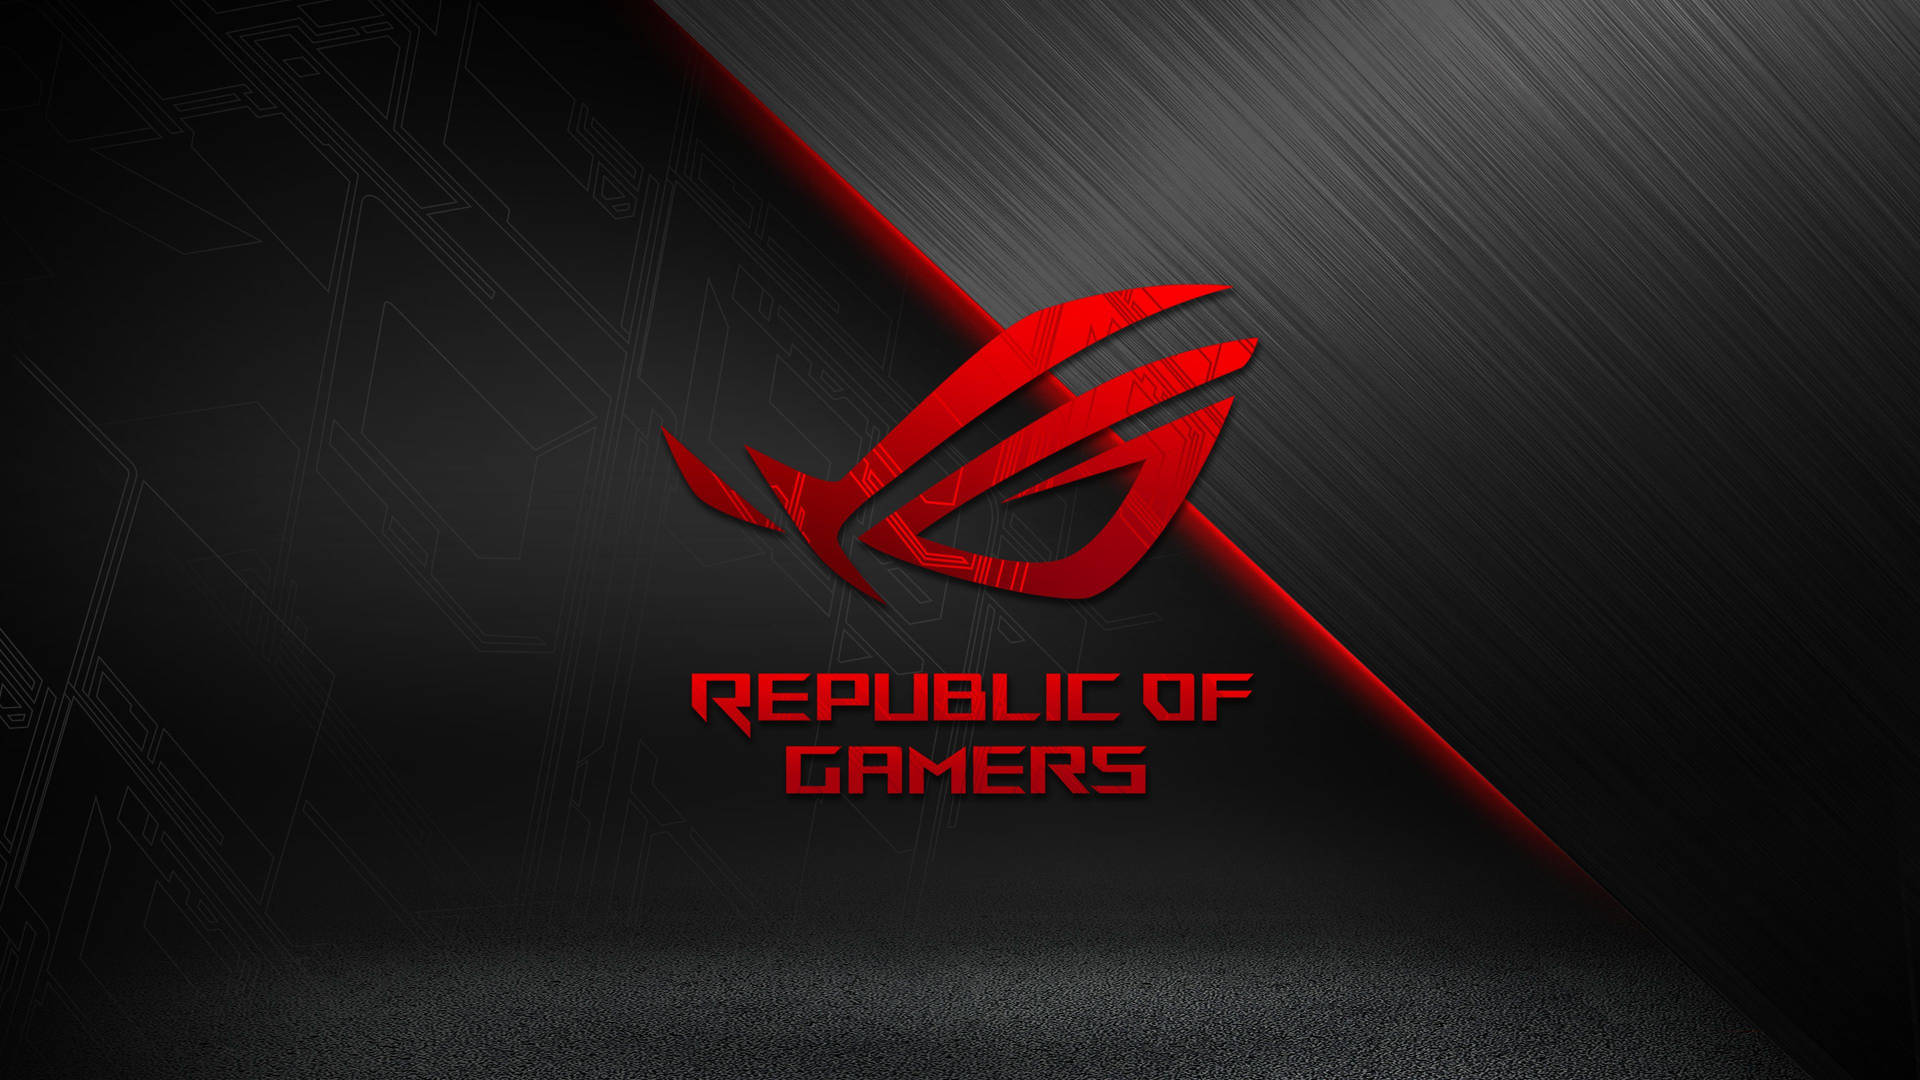 3840X2160 Asus Rog Wallpaper and Background